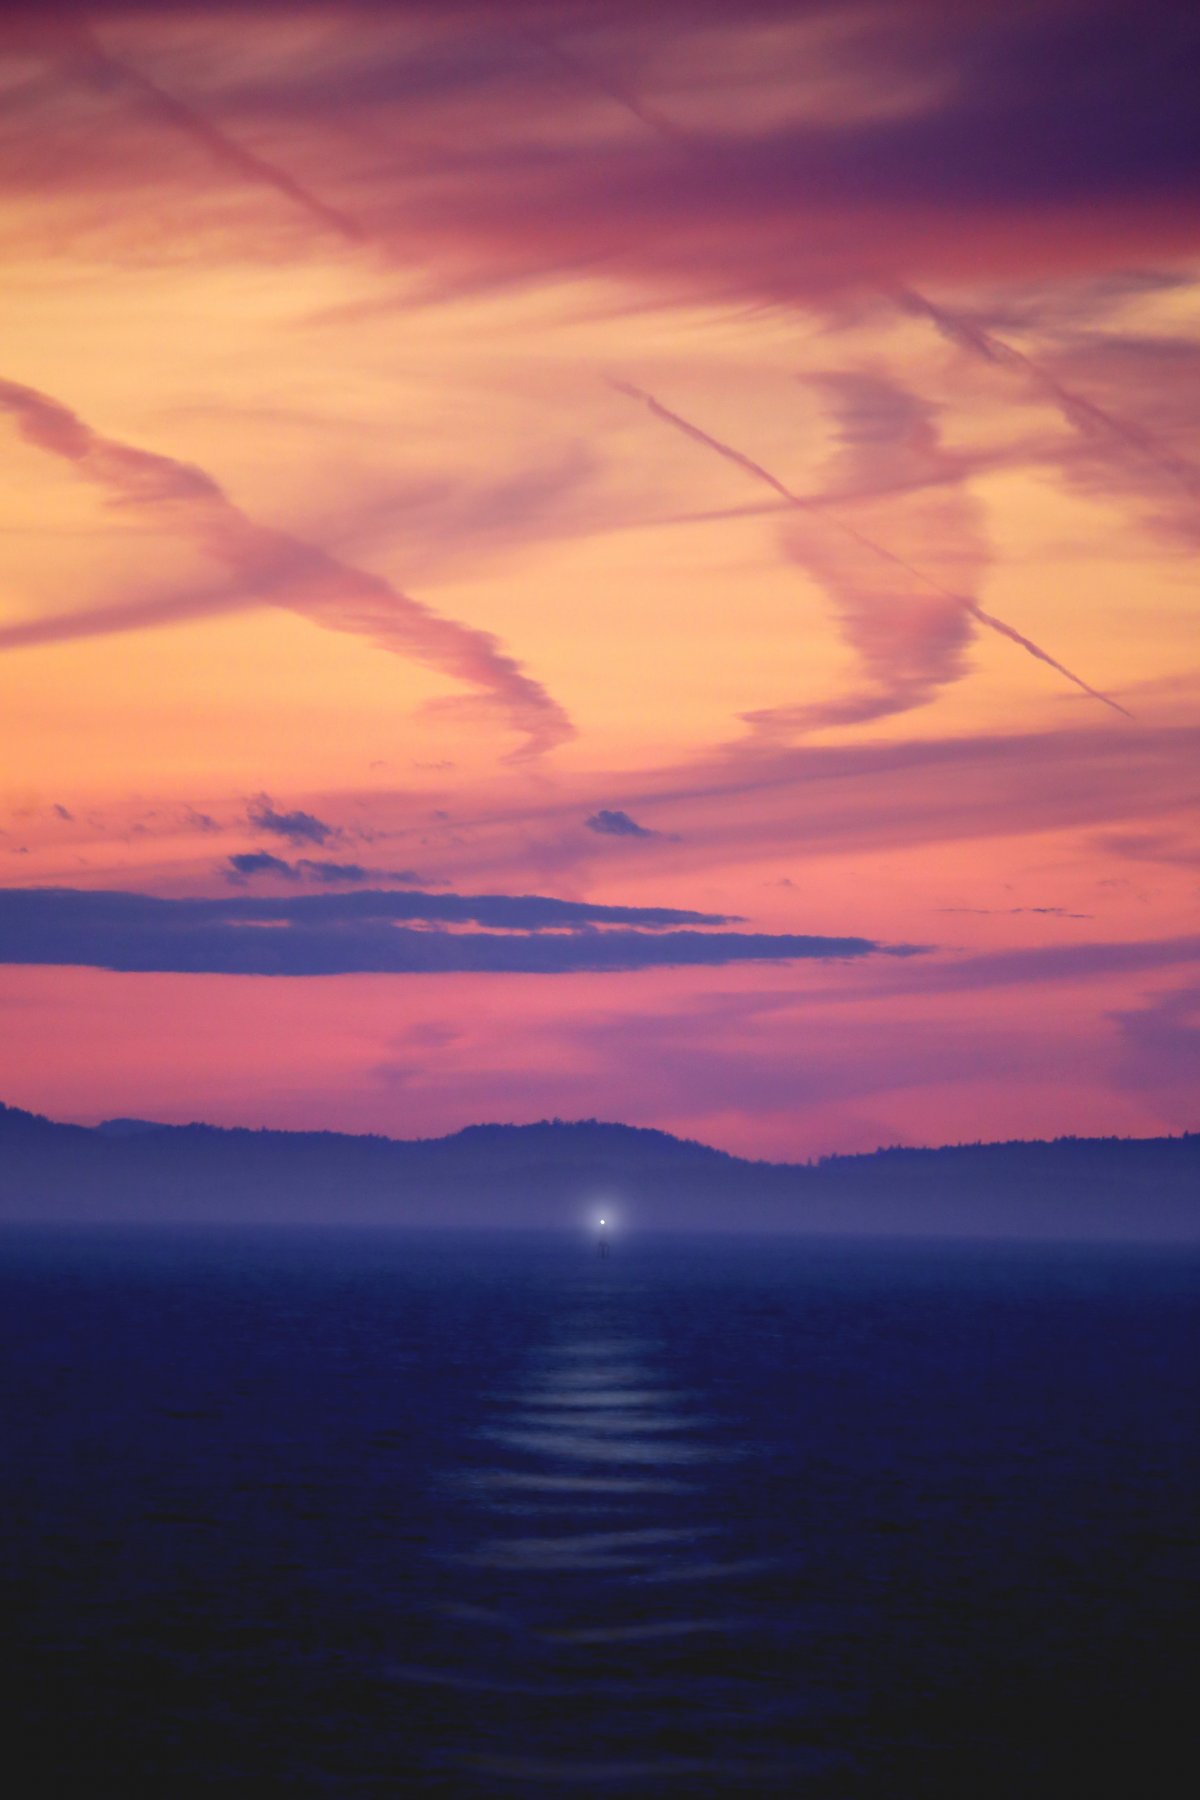 Beautiful scenery pictures of purple dusk and sunset